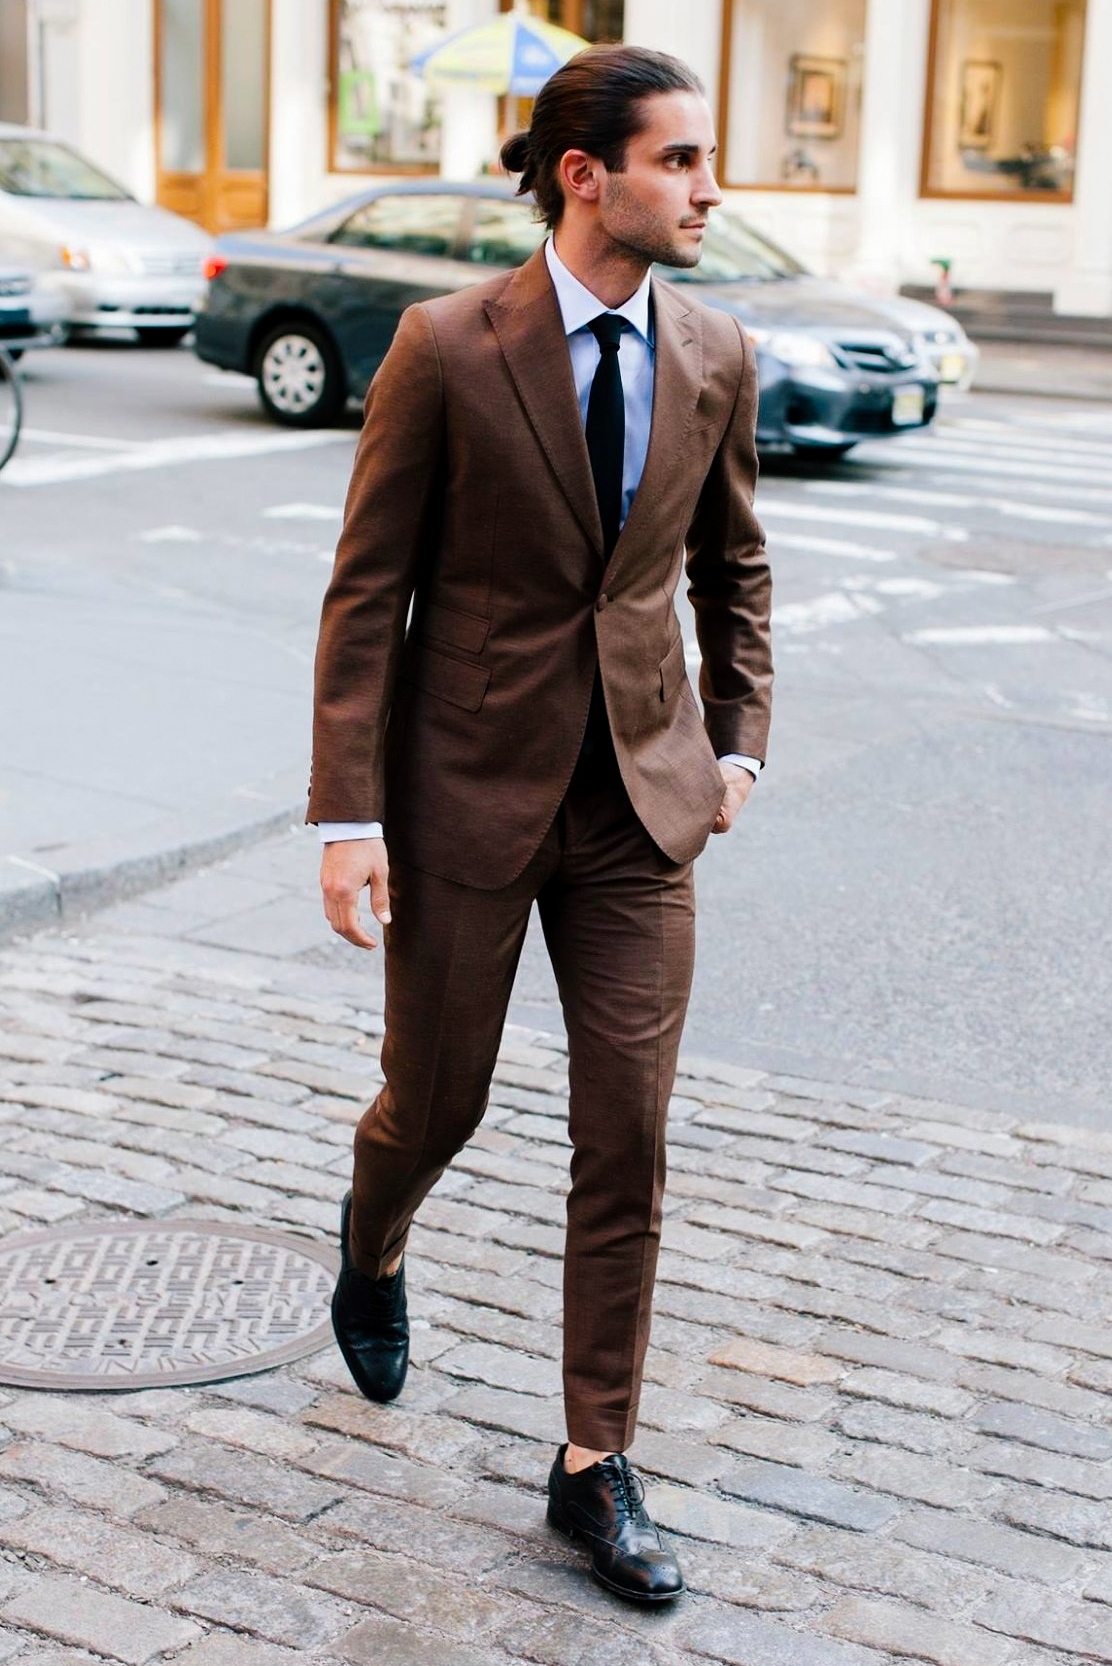 Wearing black dress shoes and a brown suit